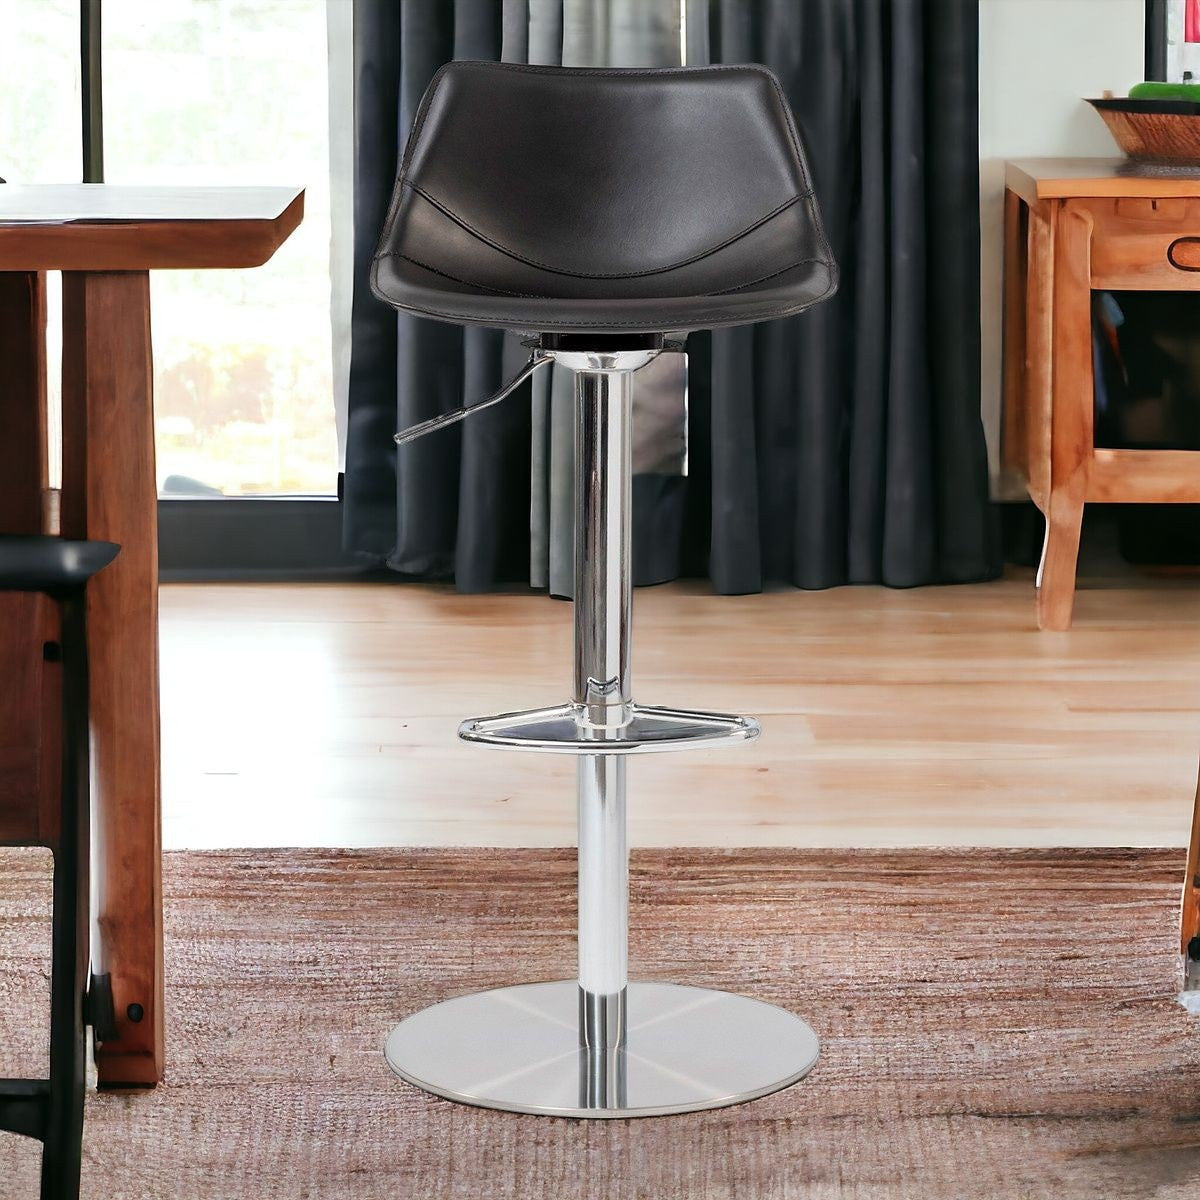 32" Black And Silver Steel Swivel Low Back Bar Height Bar Chair